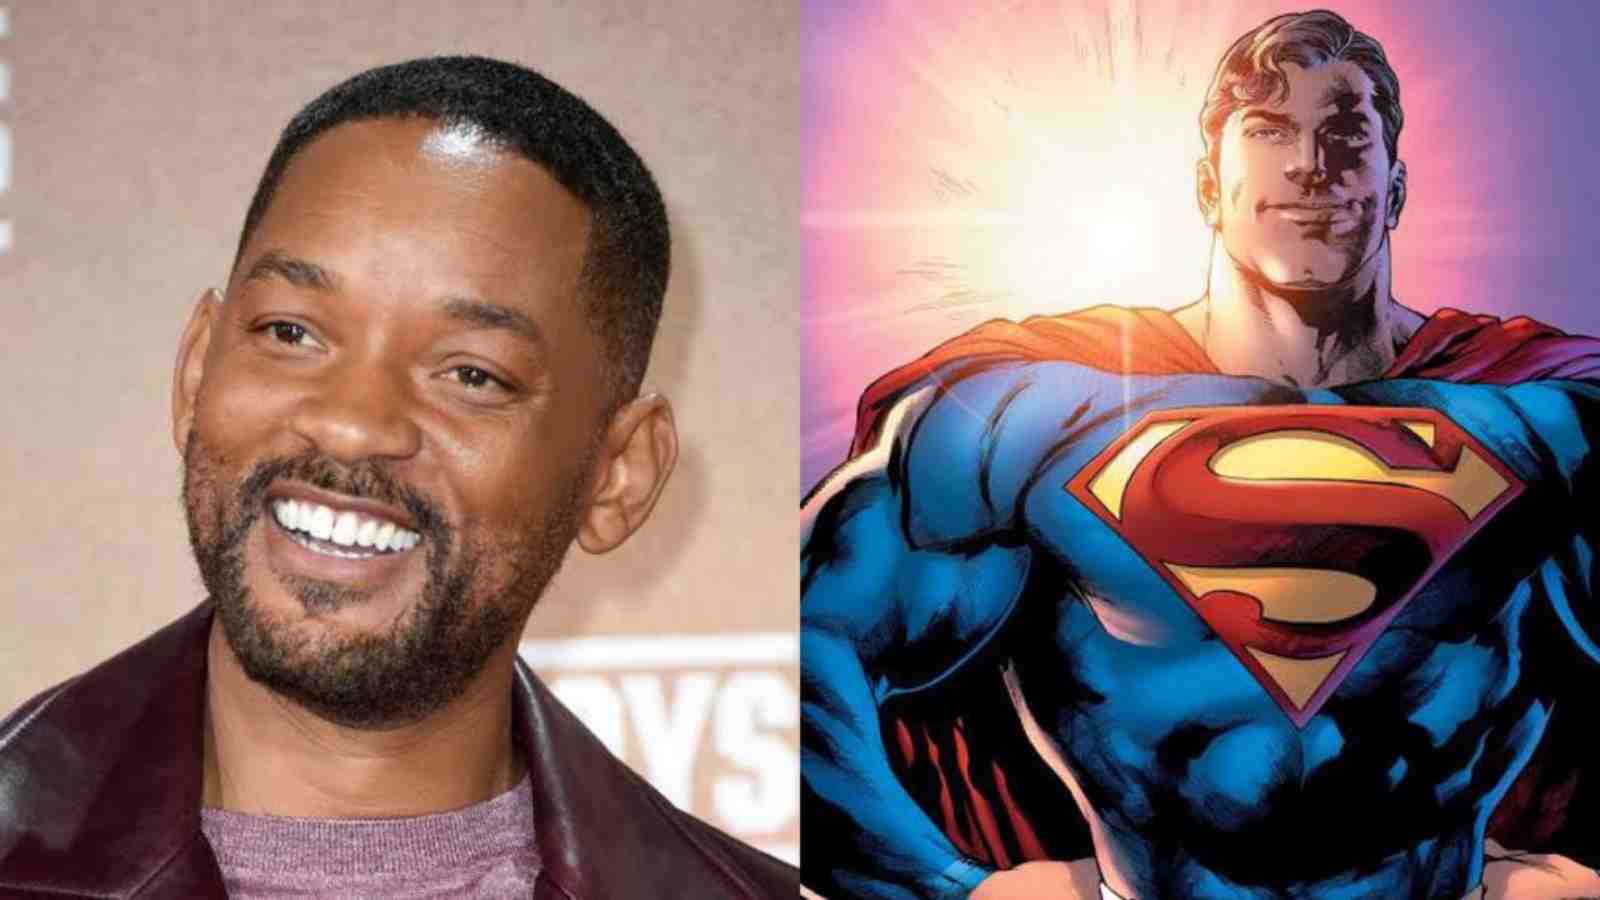 Why did Will Smith reject the role of Superaman?